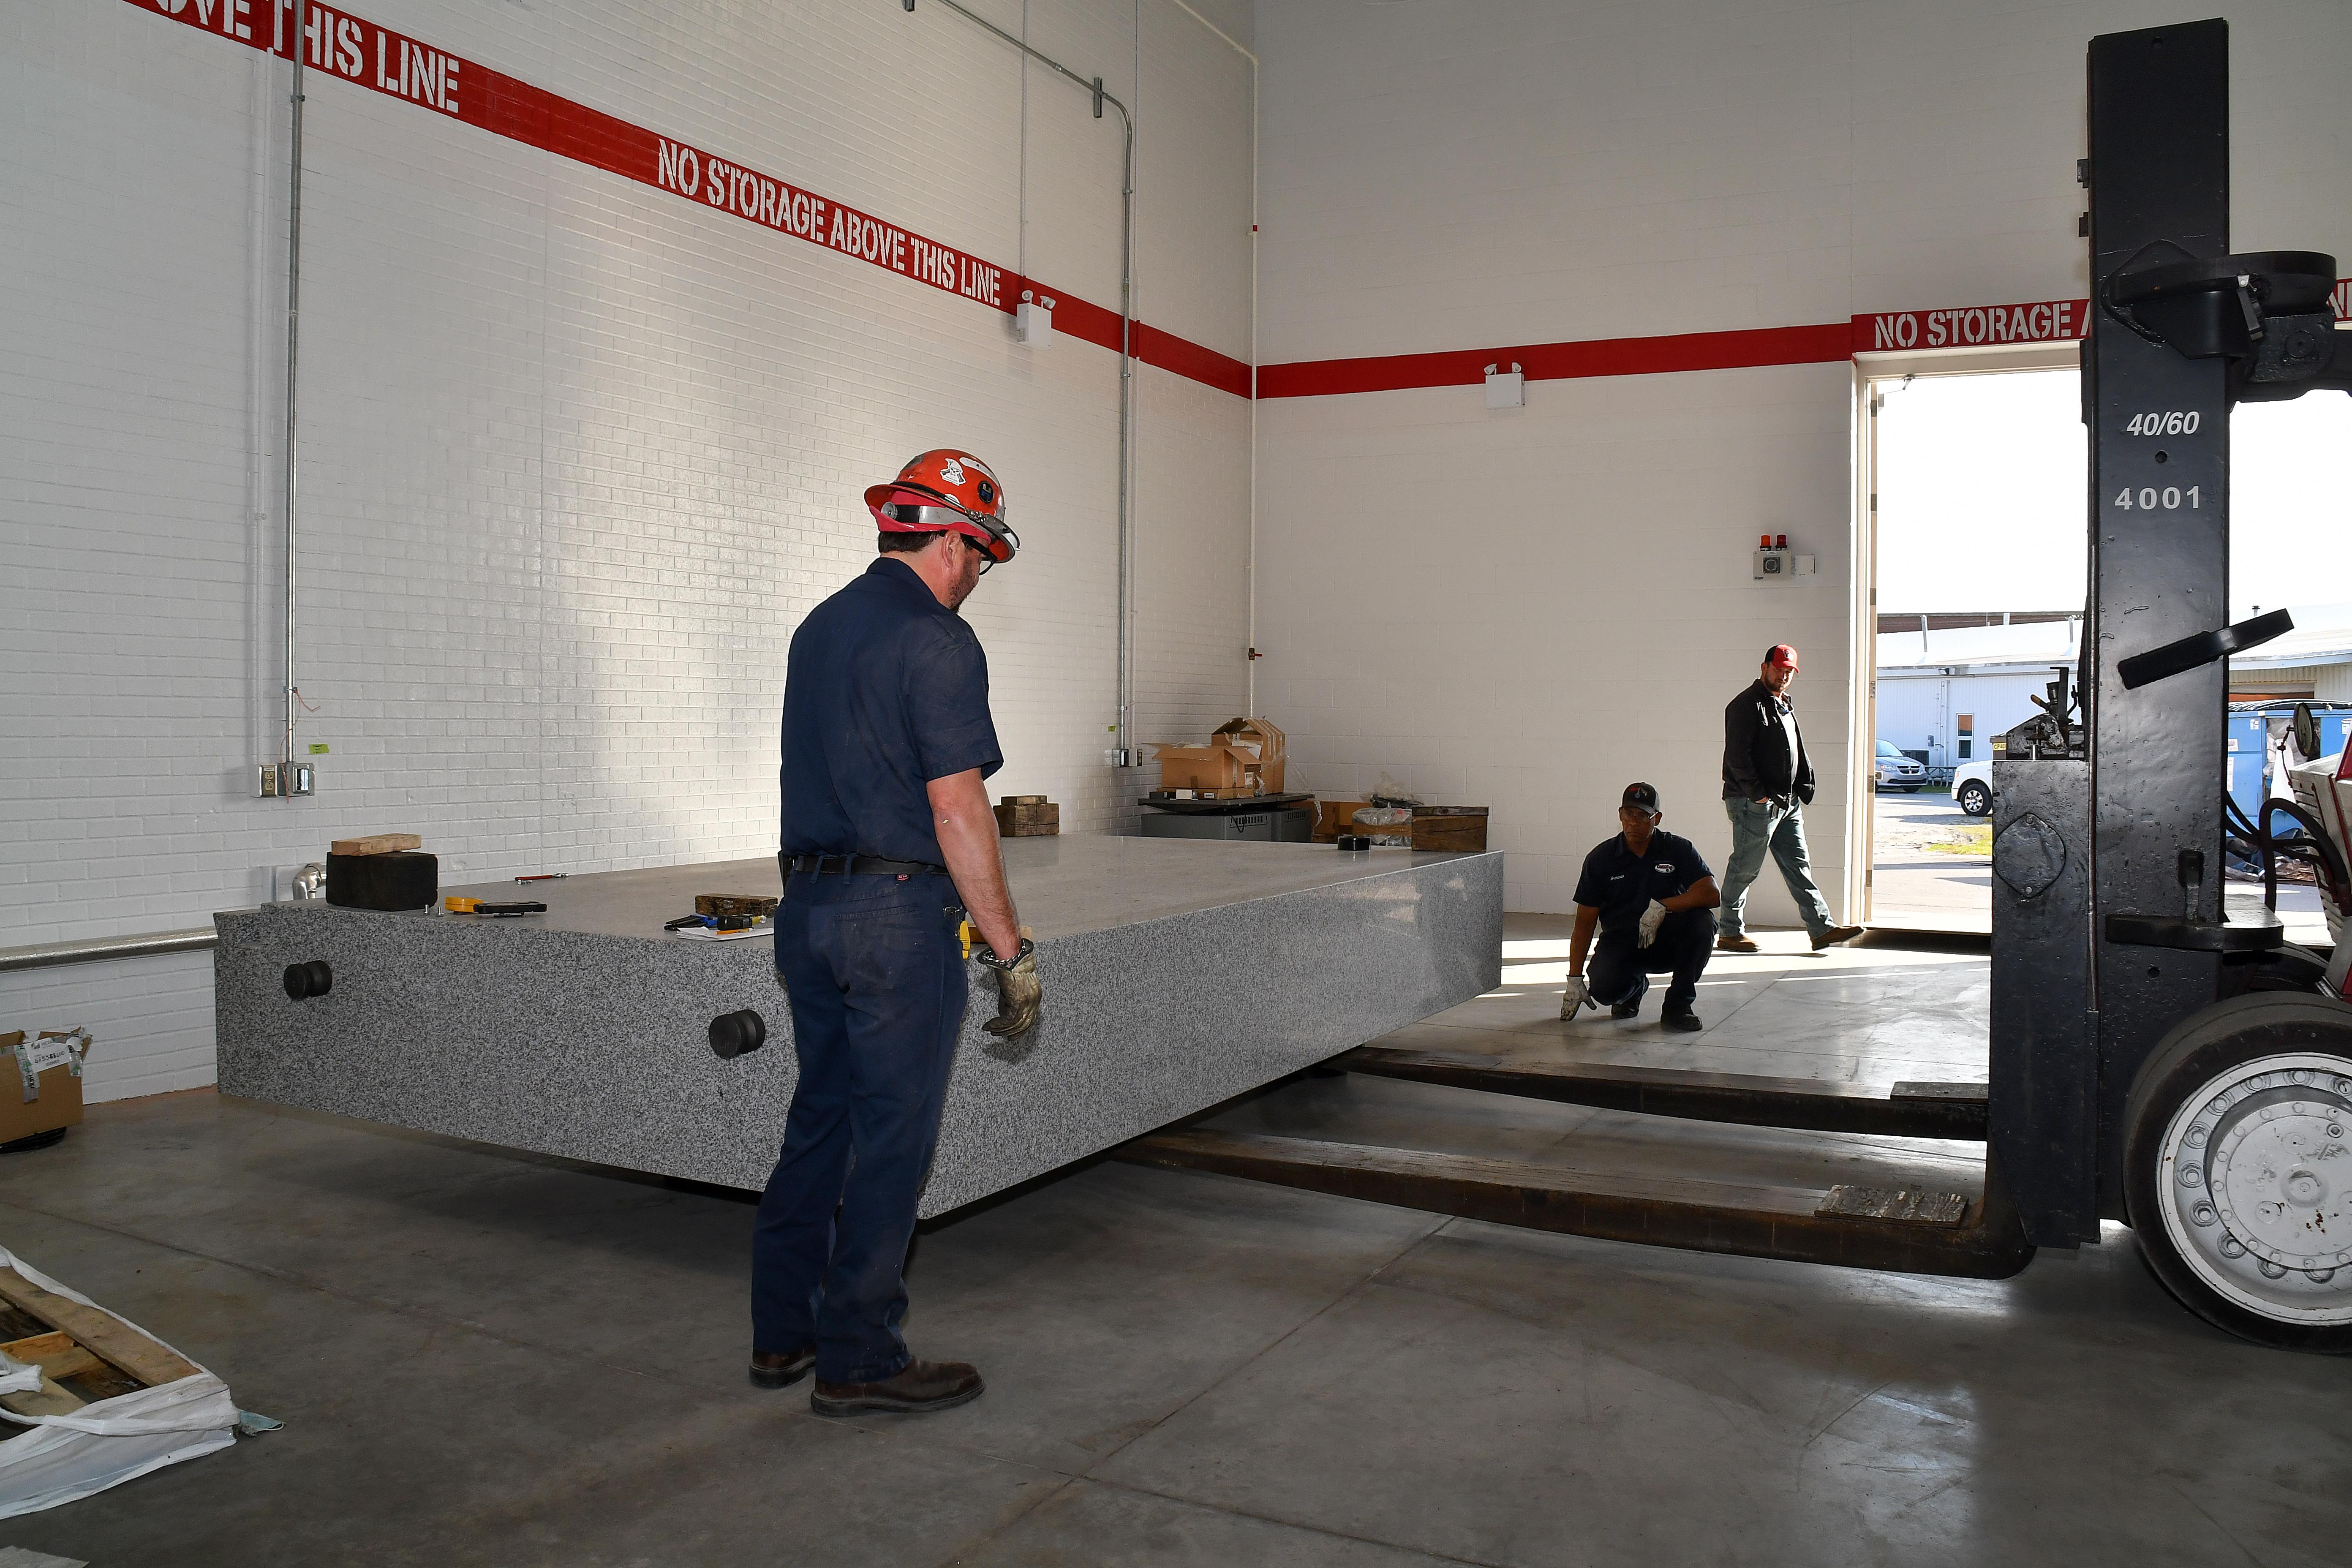 Rigging technicians move a granite table weighing 14 tons into place at Fleet Readiness Center East (FRCE). The table is part of a coordinate measuring machine (CMM). FRCE recently acquired two new CMMs capable of large-volume measurement. In addition to providing large item measurements, depot officials say these additional machines will improve efficiency and reduce wait times caused by maintenance and equipment calibration.